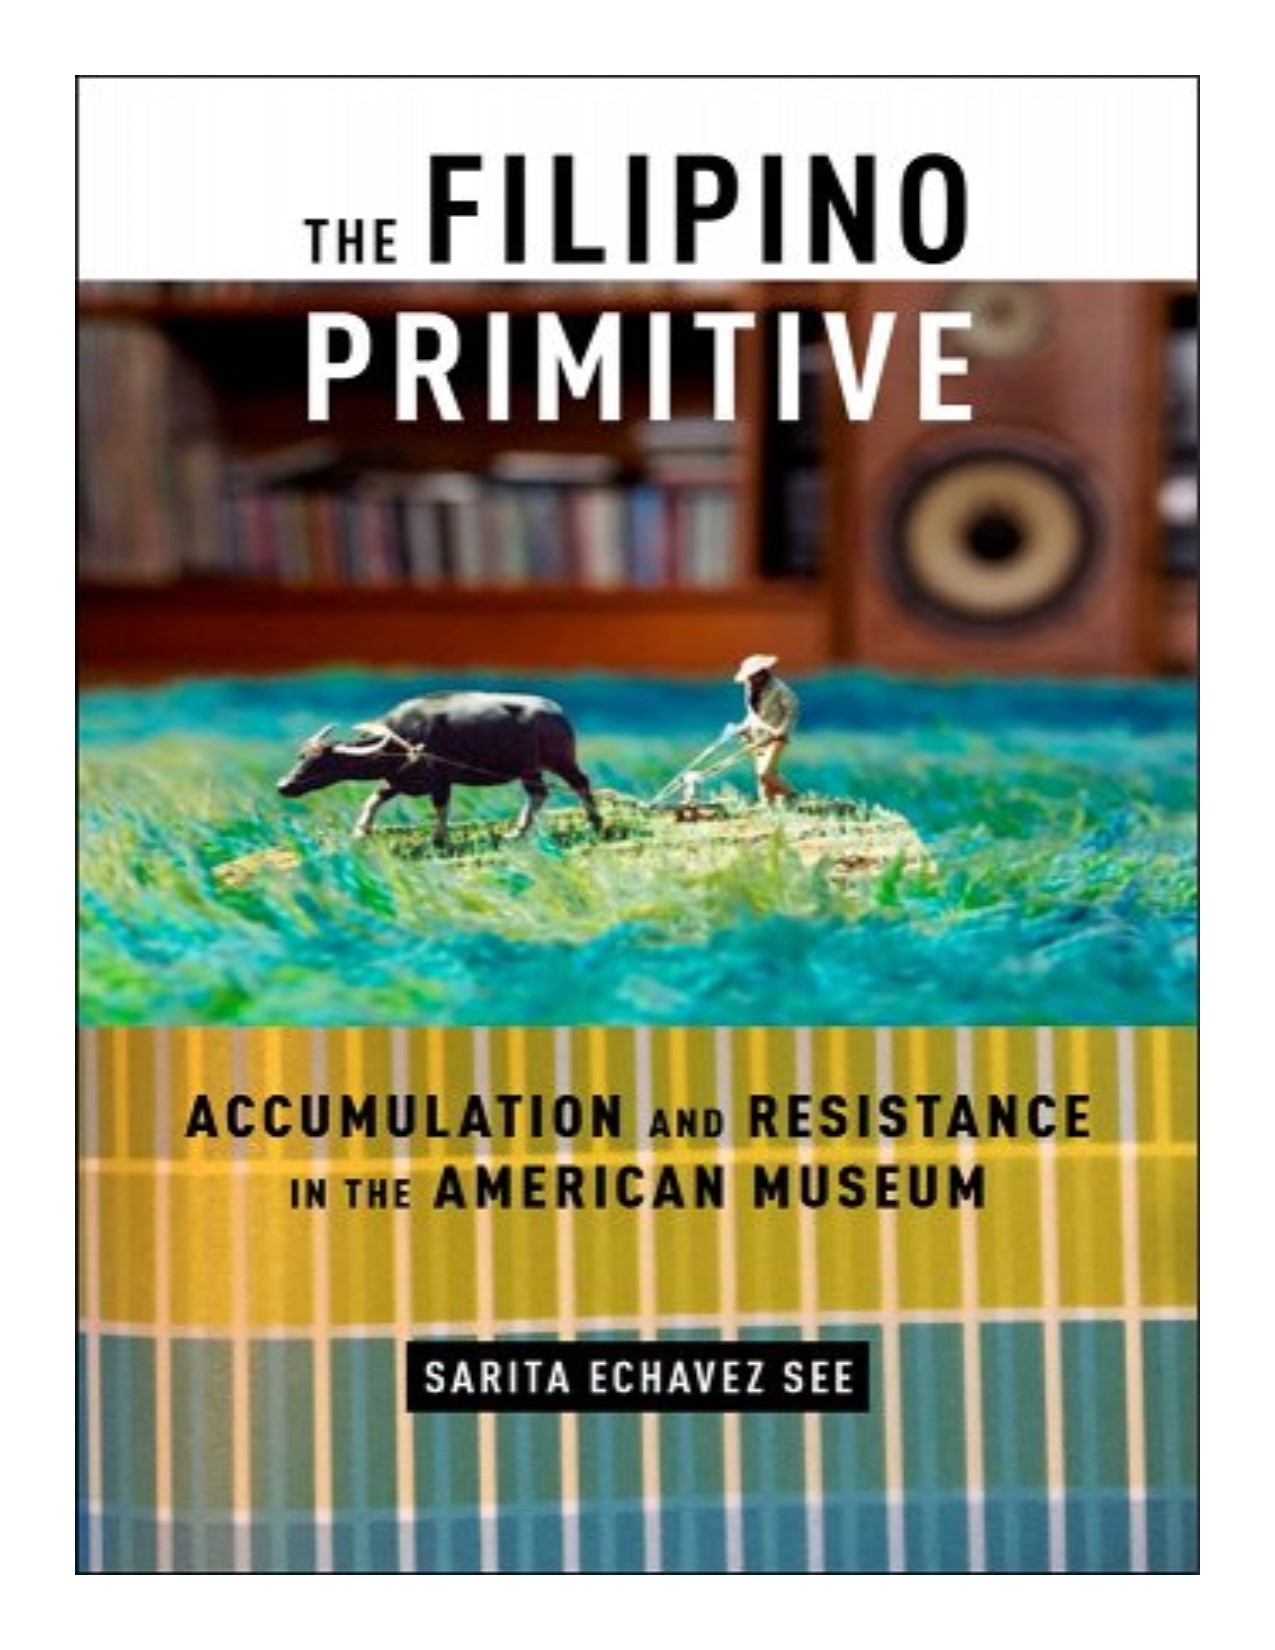 The Filipino primitive accumulation and resistance in the American museum